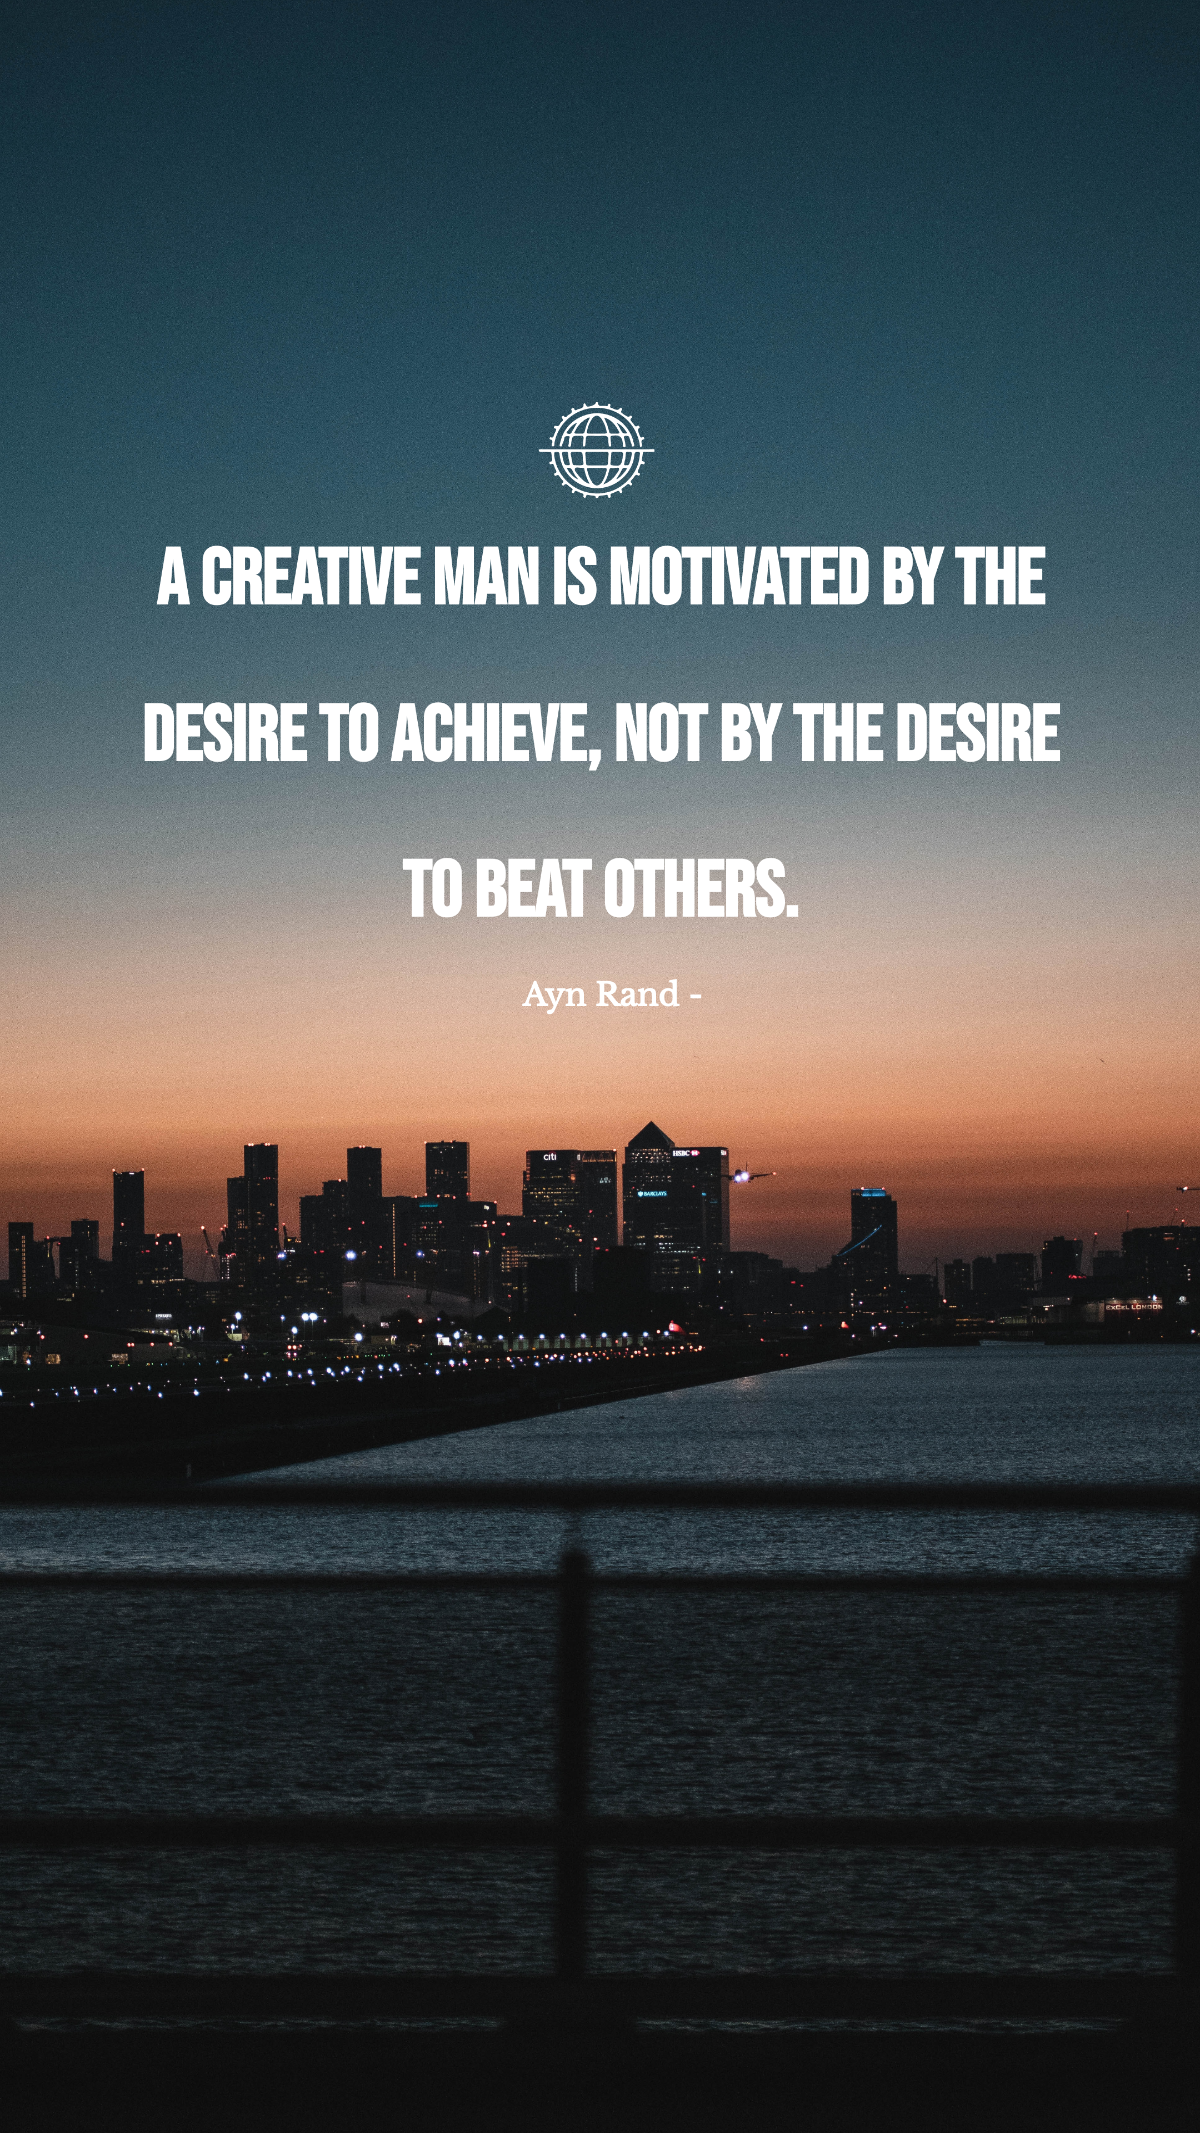 Ayn Rand - A creative man is motivated by the desire to achieve, not by the desire to beat others. Template